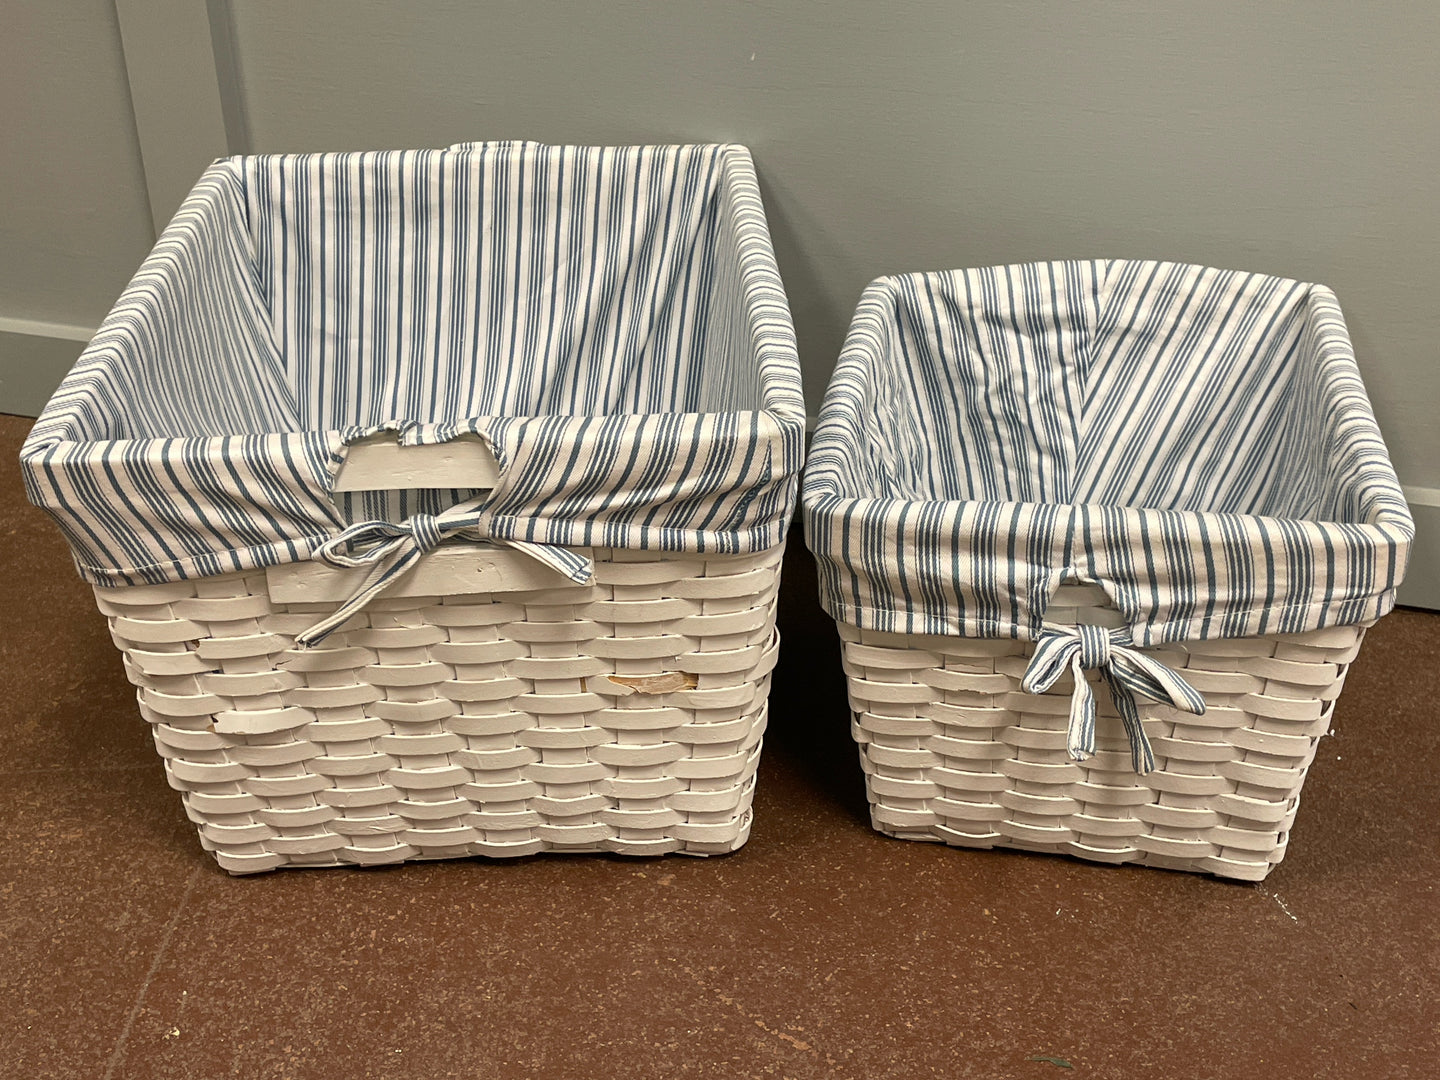 Pair of White Wicker Lined Storage Baskets